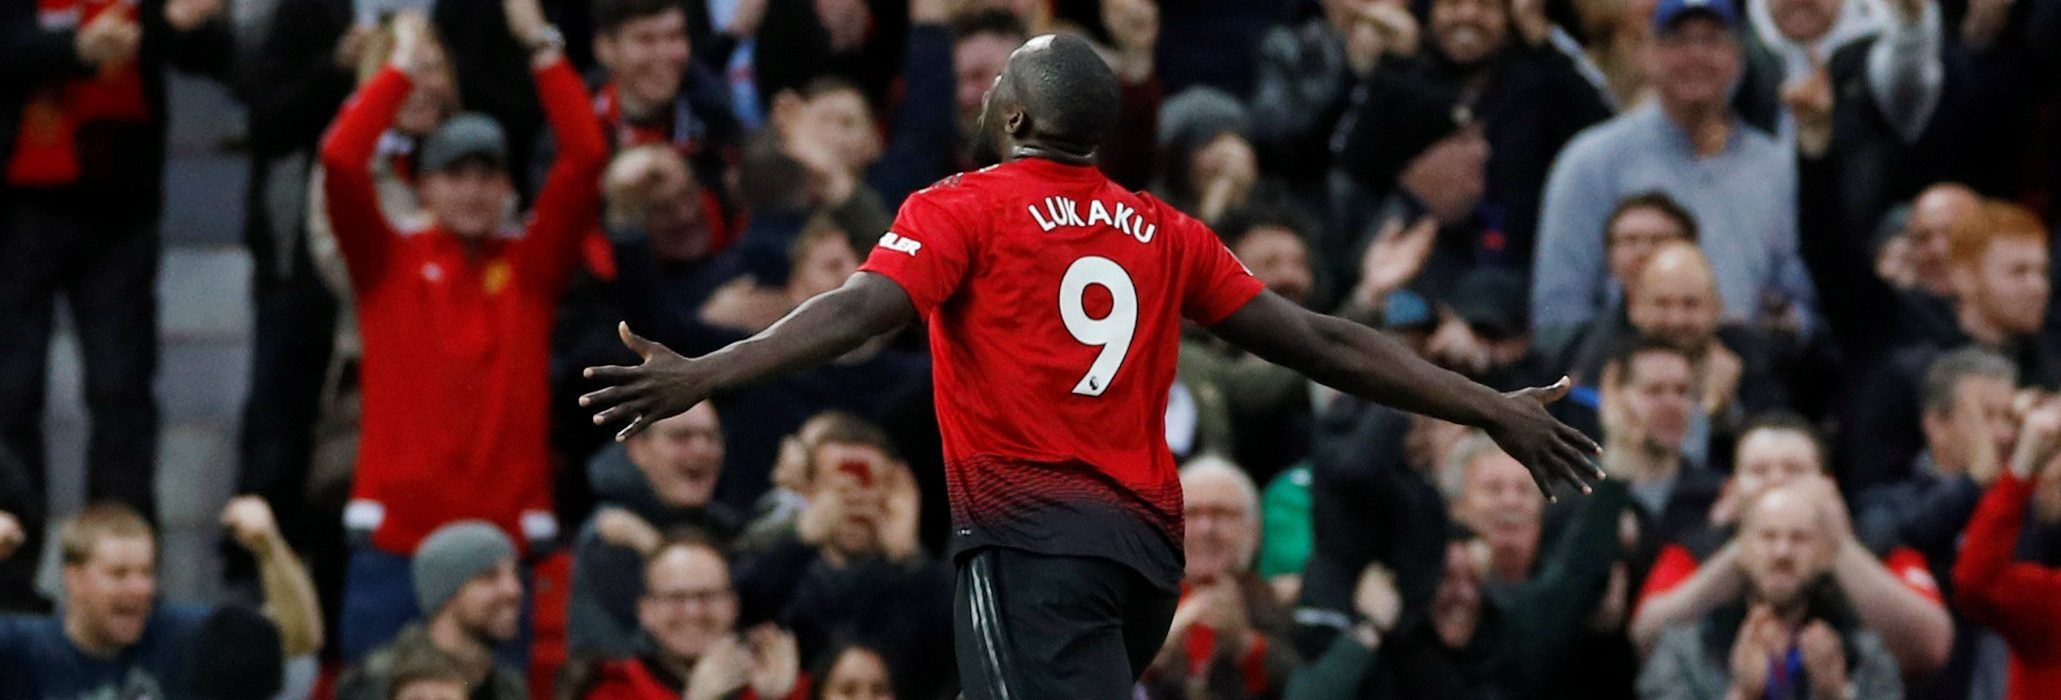 Soccer Football - Premier League - Manchester United v Southampton - Old Trafford, Manchester, Britain - March 2, 2019  Manchester United's Romelu Lukaku celebrates scoring their second goal                      REUTERS/Phil Noble  EDITORIAL USE ONLY. No use with unauthorized audio, video, data, fixture lists, club/league logos or 